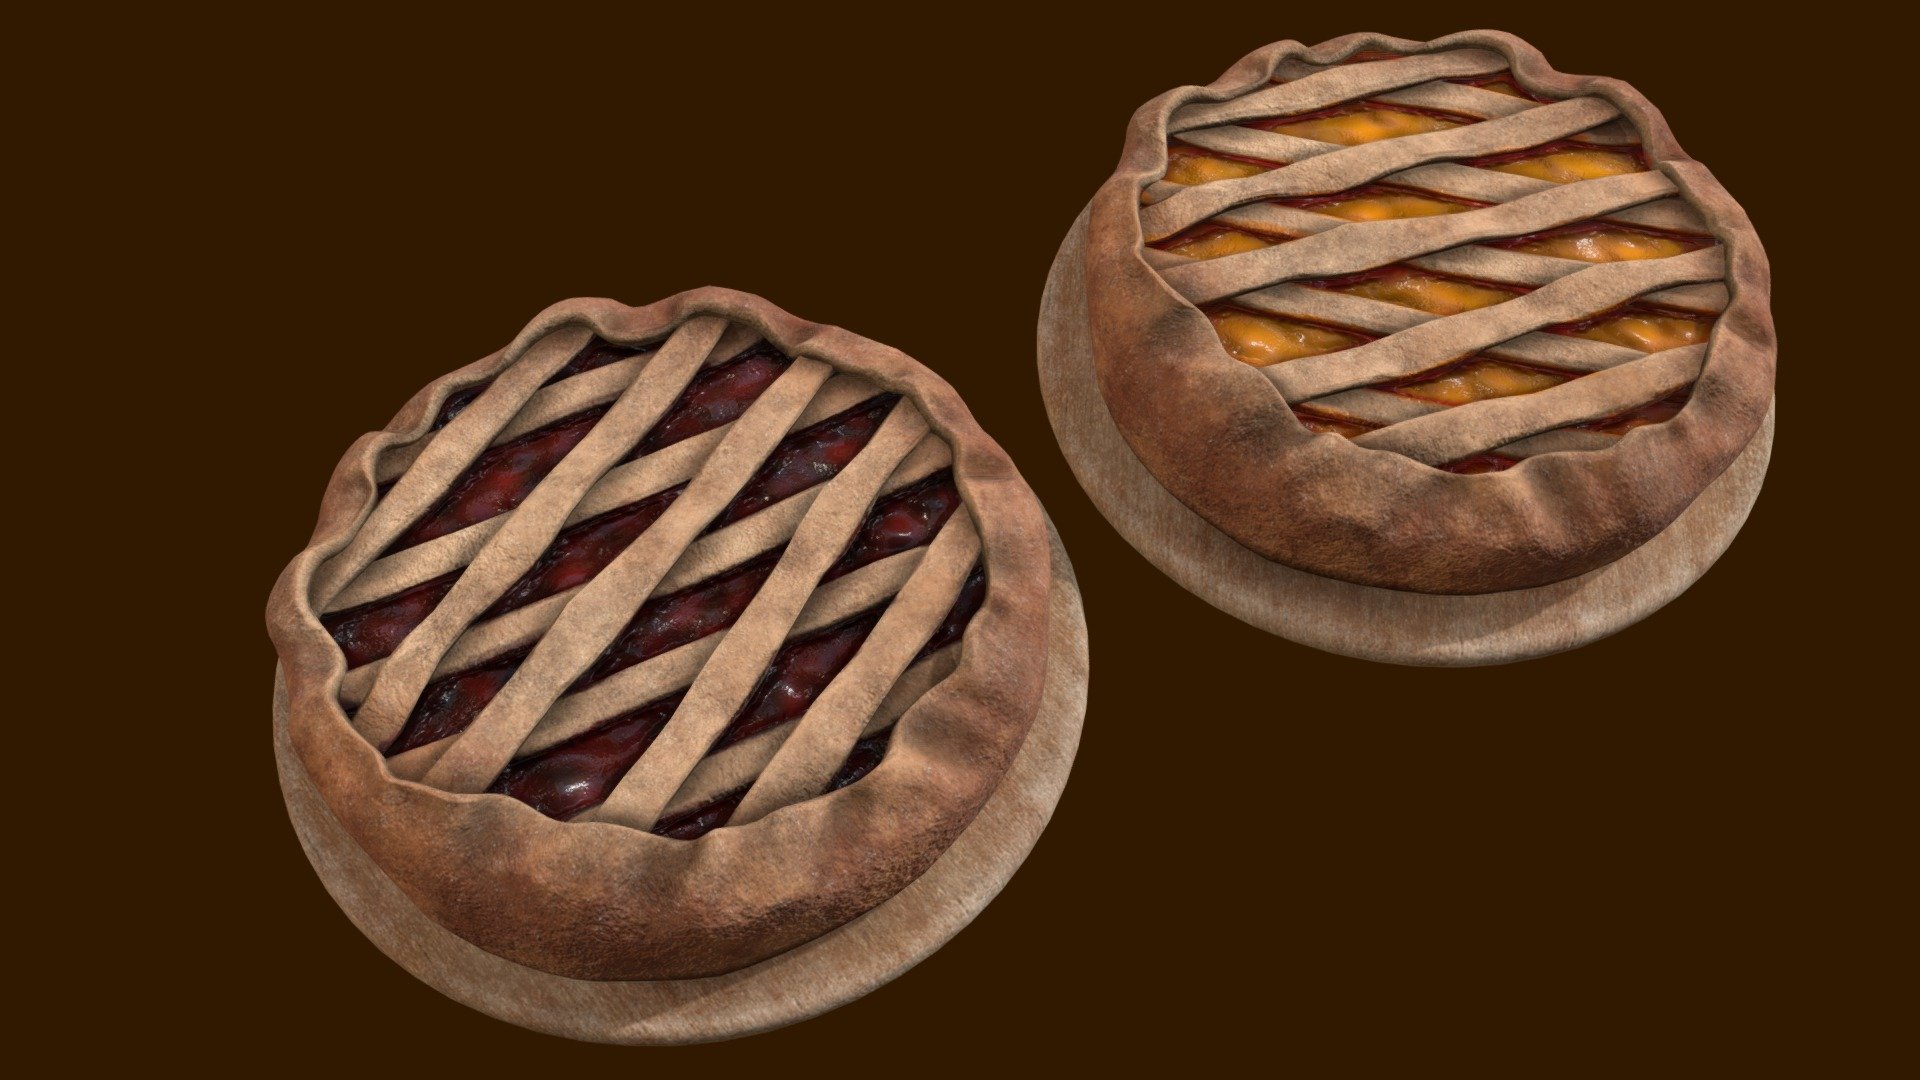 wilberries pie and apricot pie inspired by a real pie I eaten some time ago. The shape of the the pastry was different from the average pies so I decided to model it. Then I decided to set two flavors.

Modeled in Maya and Zbrush
textured in Substance Painter - Jam Pies - 3D model by LenaGiul 3d model